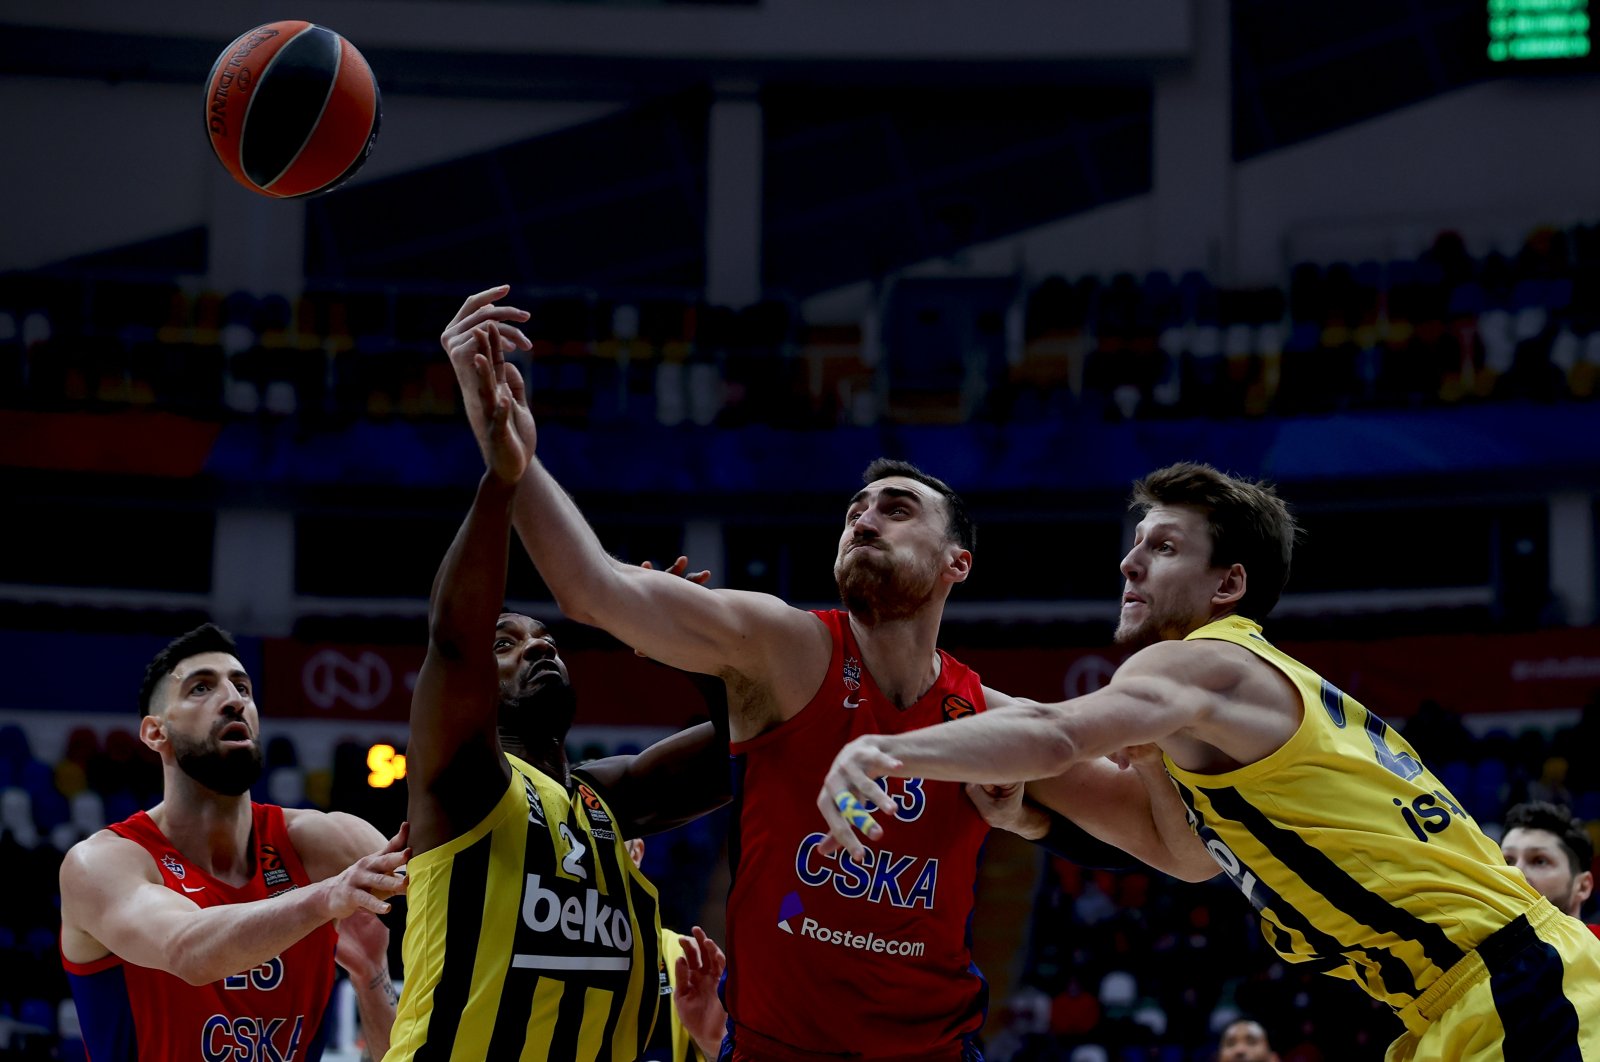 Fenerbahçe's Dyshawn Pierre (2nd L) vies for the ball with CSKA Moscow's Nikola Milutinov (C) in the THY EuroLeague, at the Megasport Arena, Moscow, Russia, Jan. 22, 2021. (AA Photo)